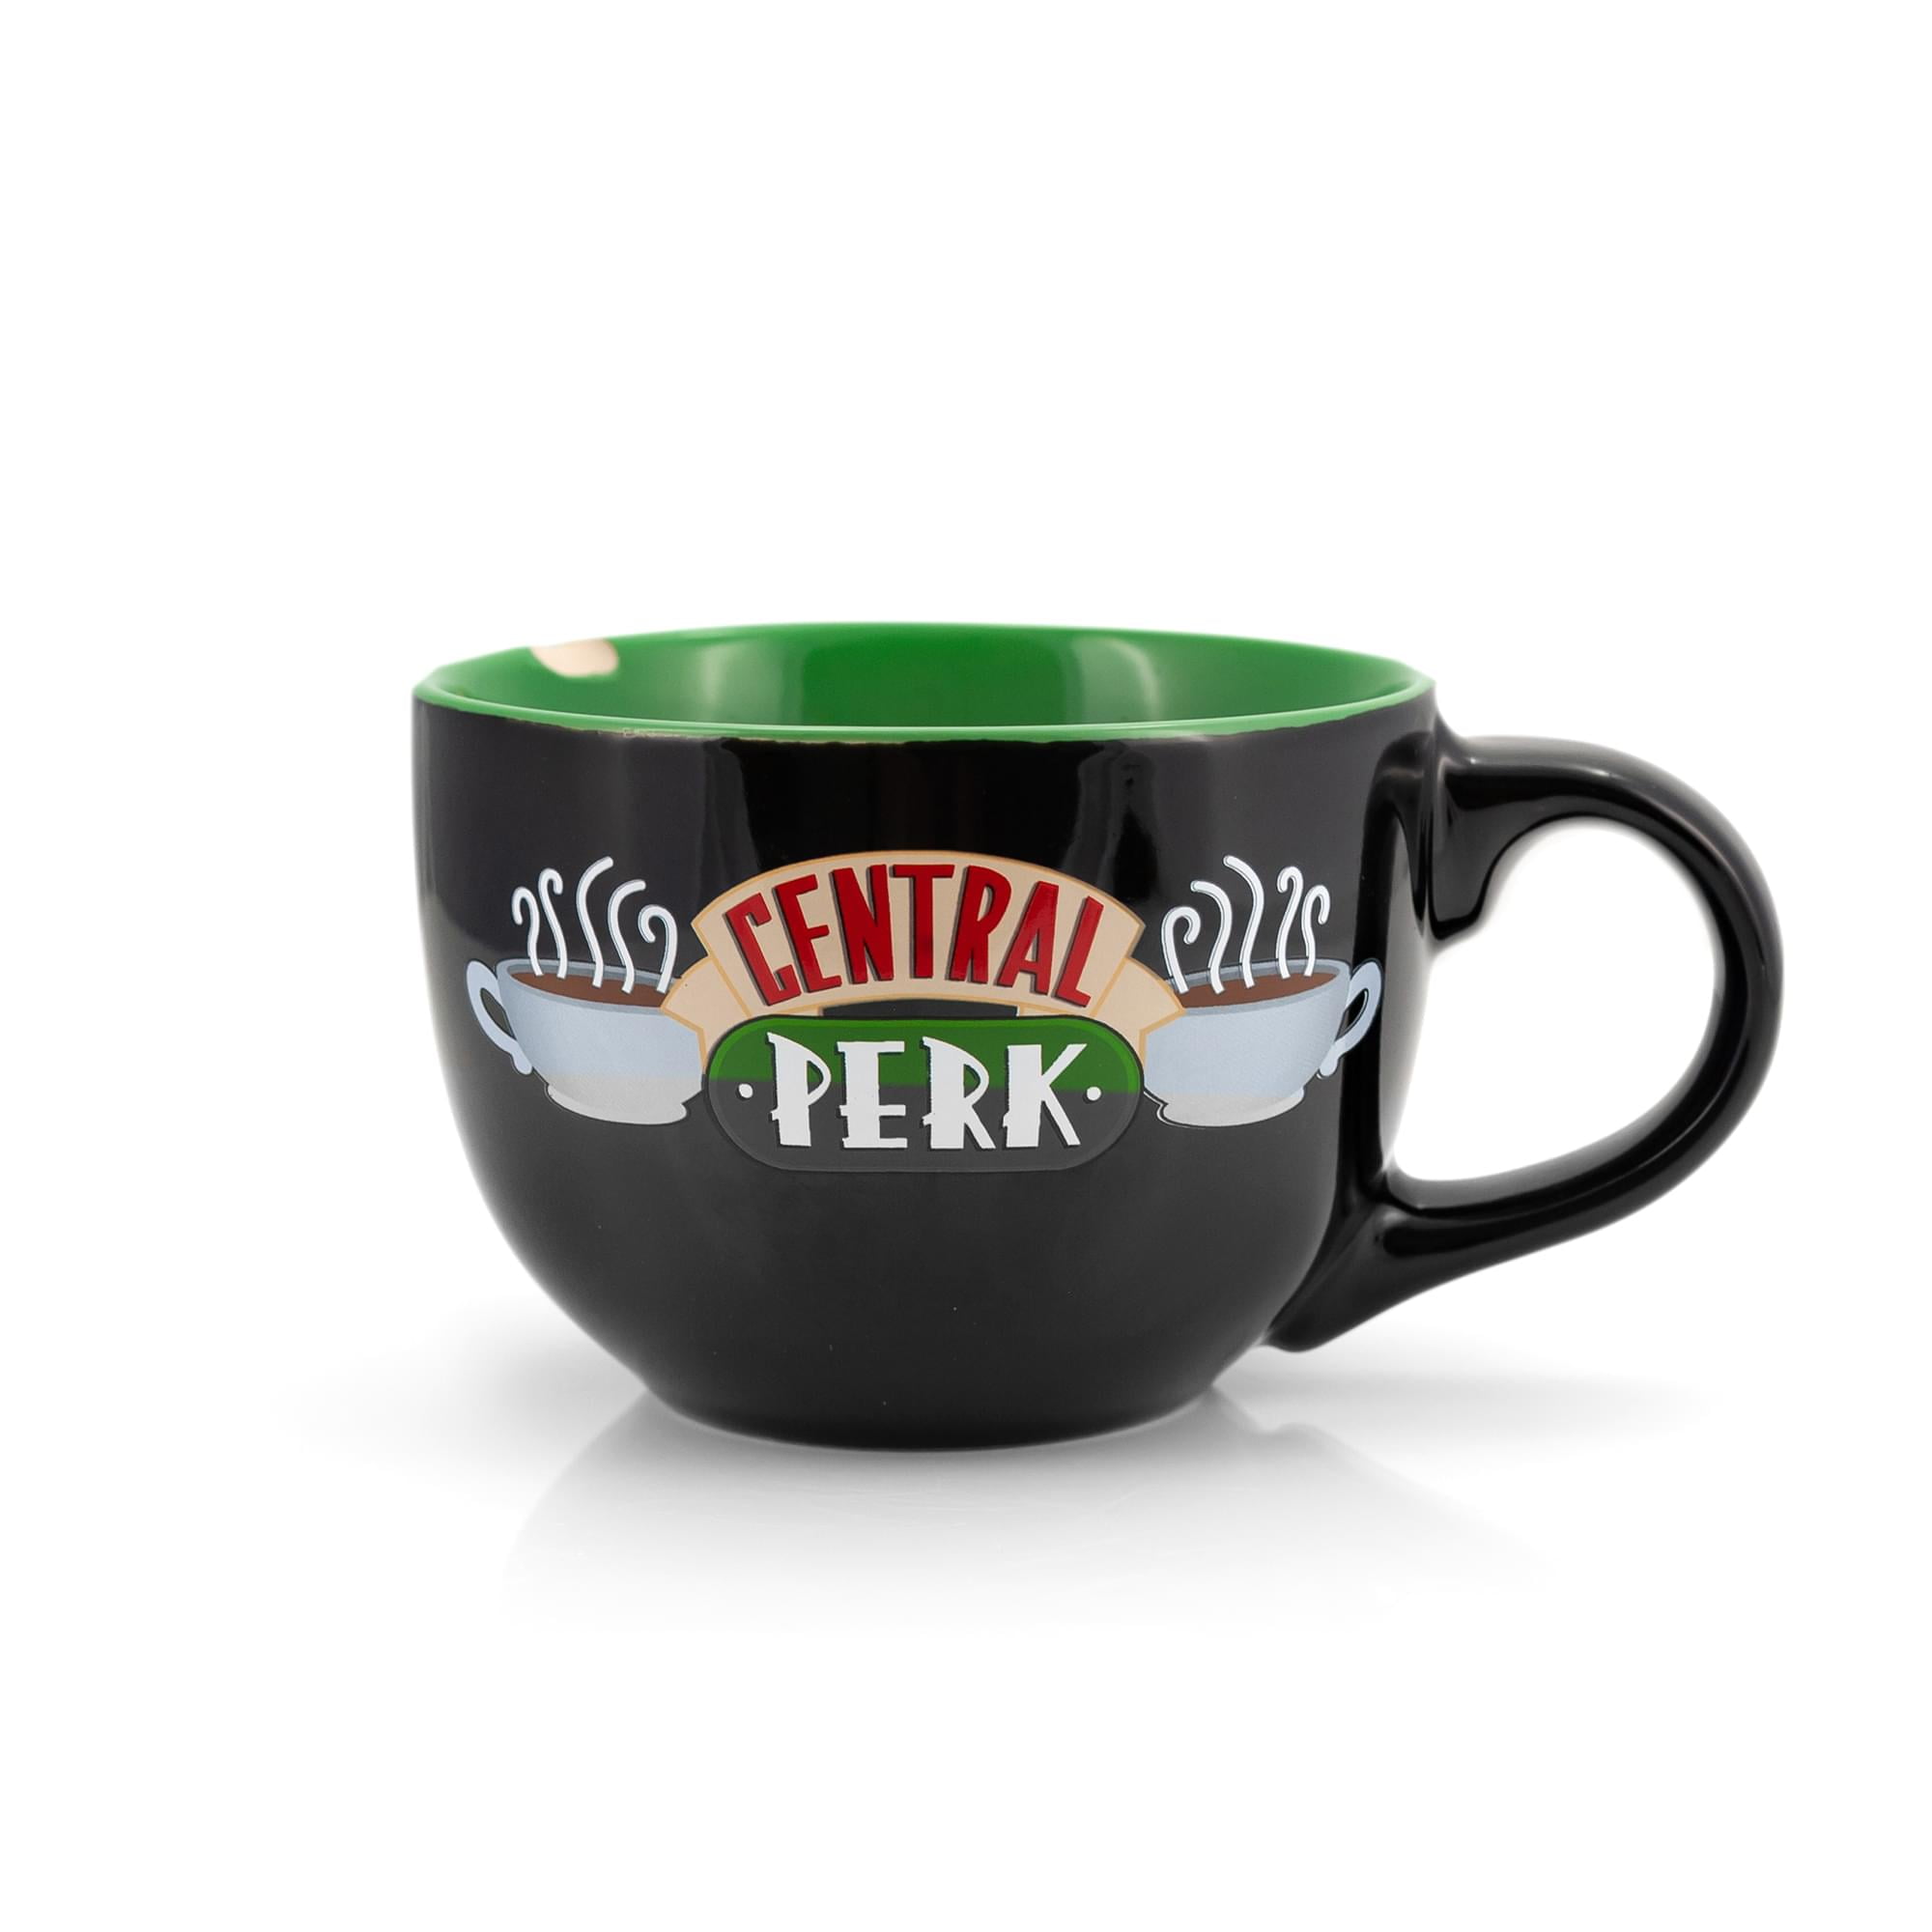 OFFICIAL FRIENDS TV SHOW LARGE CENTRAL PERK COFFEE MUG CUP NEW IN GIFT BOX 